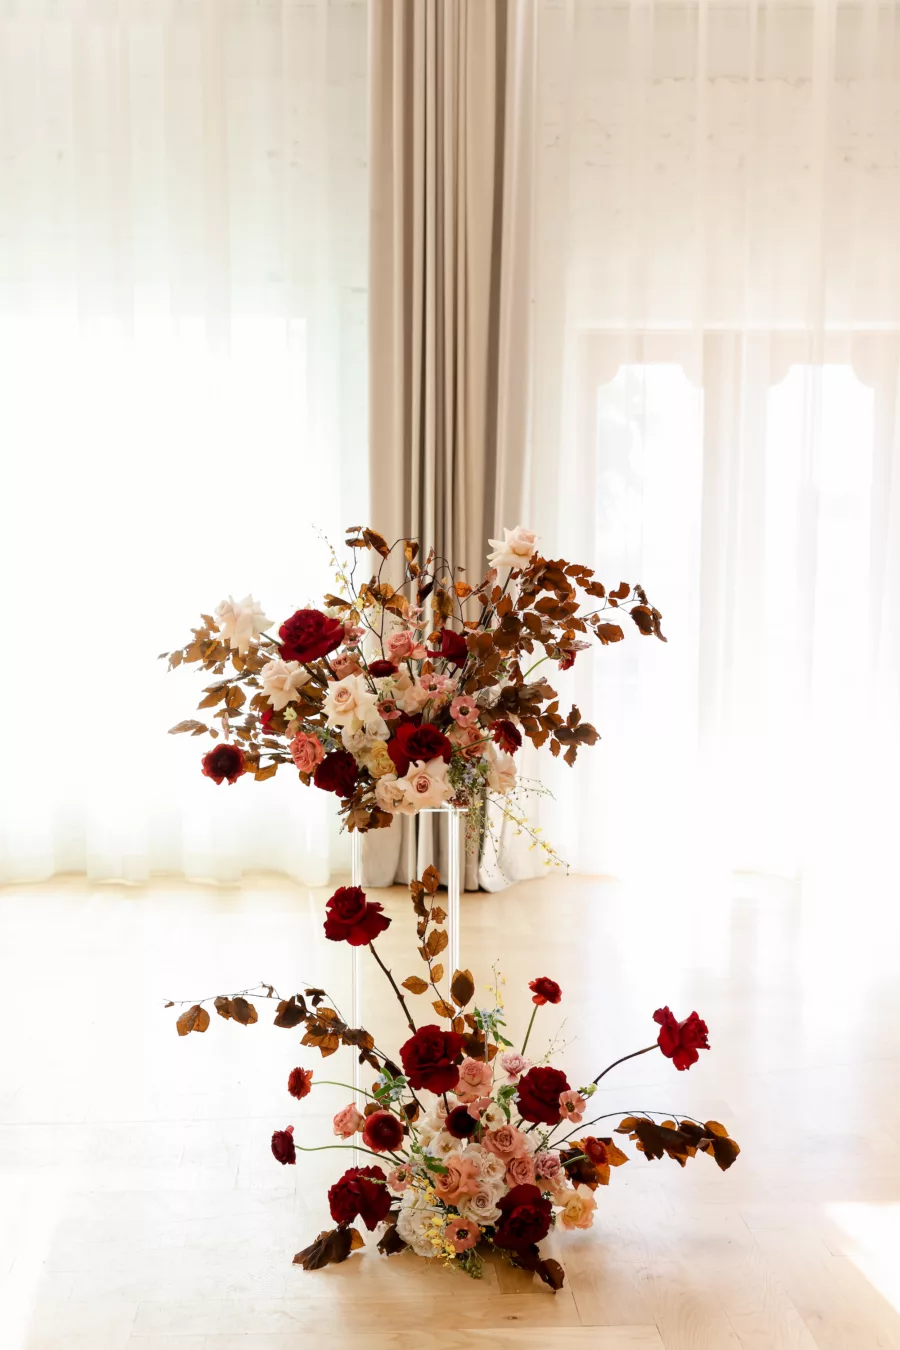 Whimsical Red, Pink, and White Rose Wedding Ceremony Altar Decor Inspiration